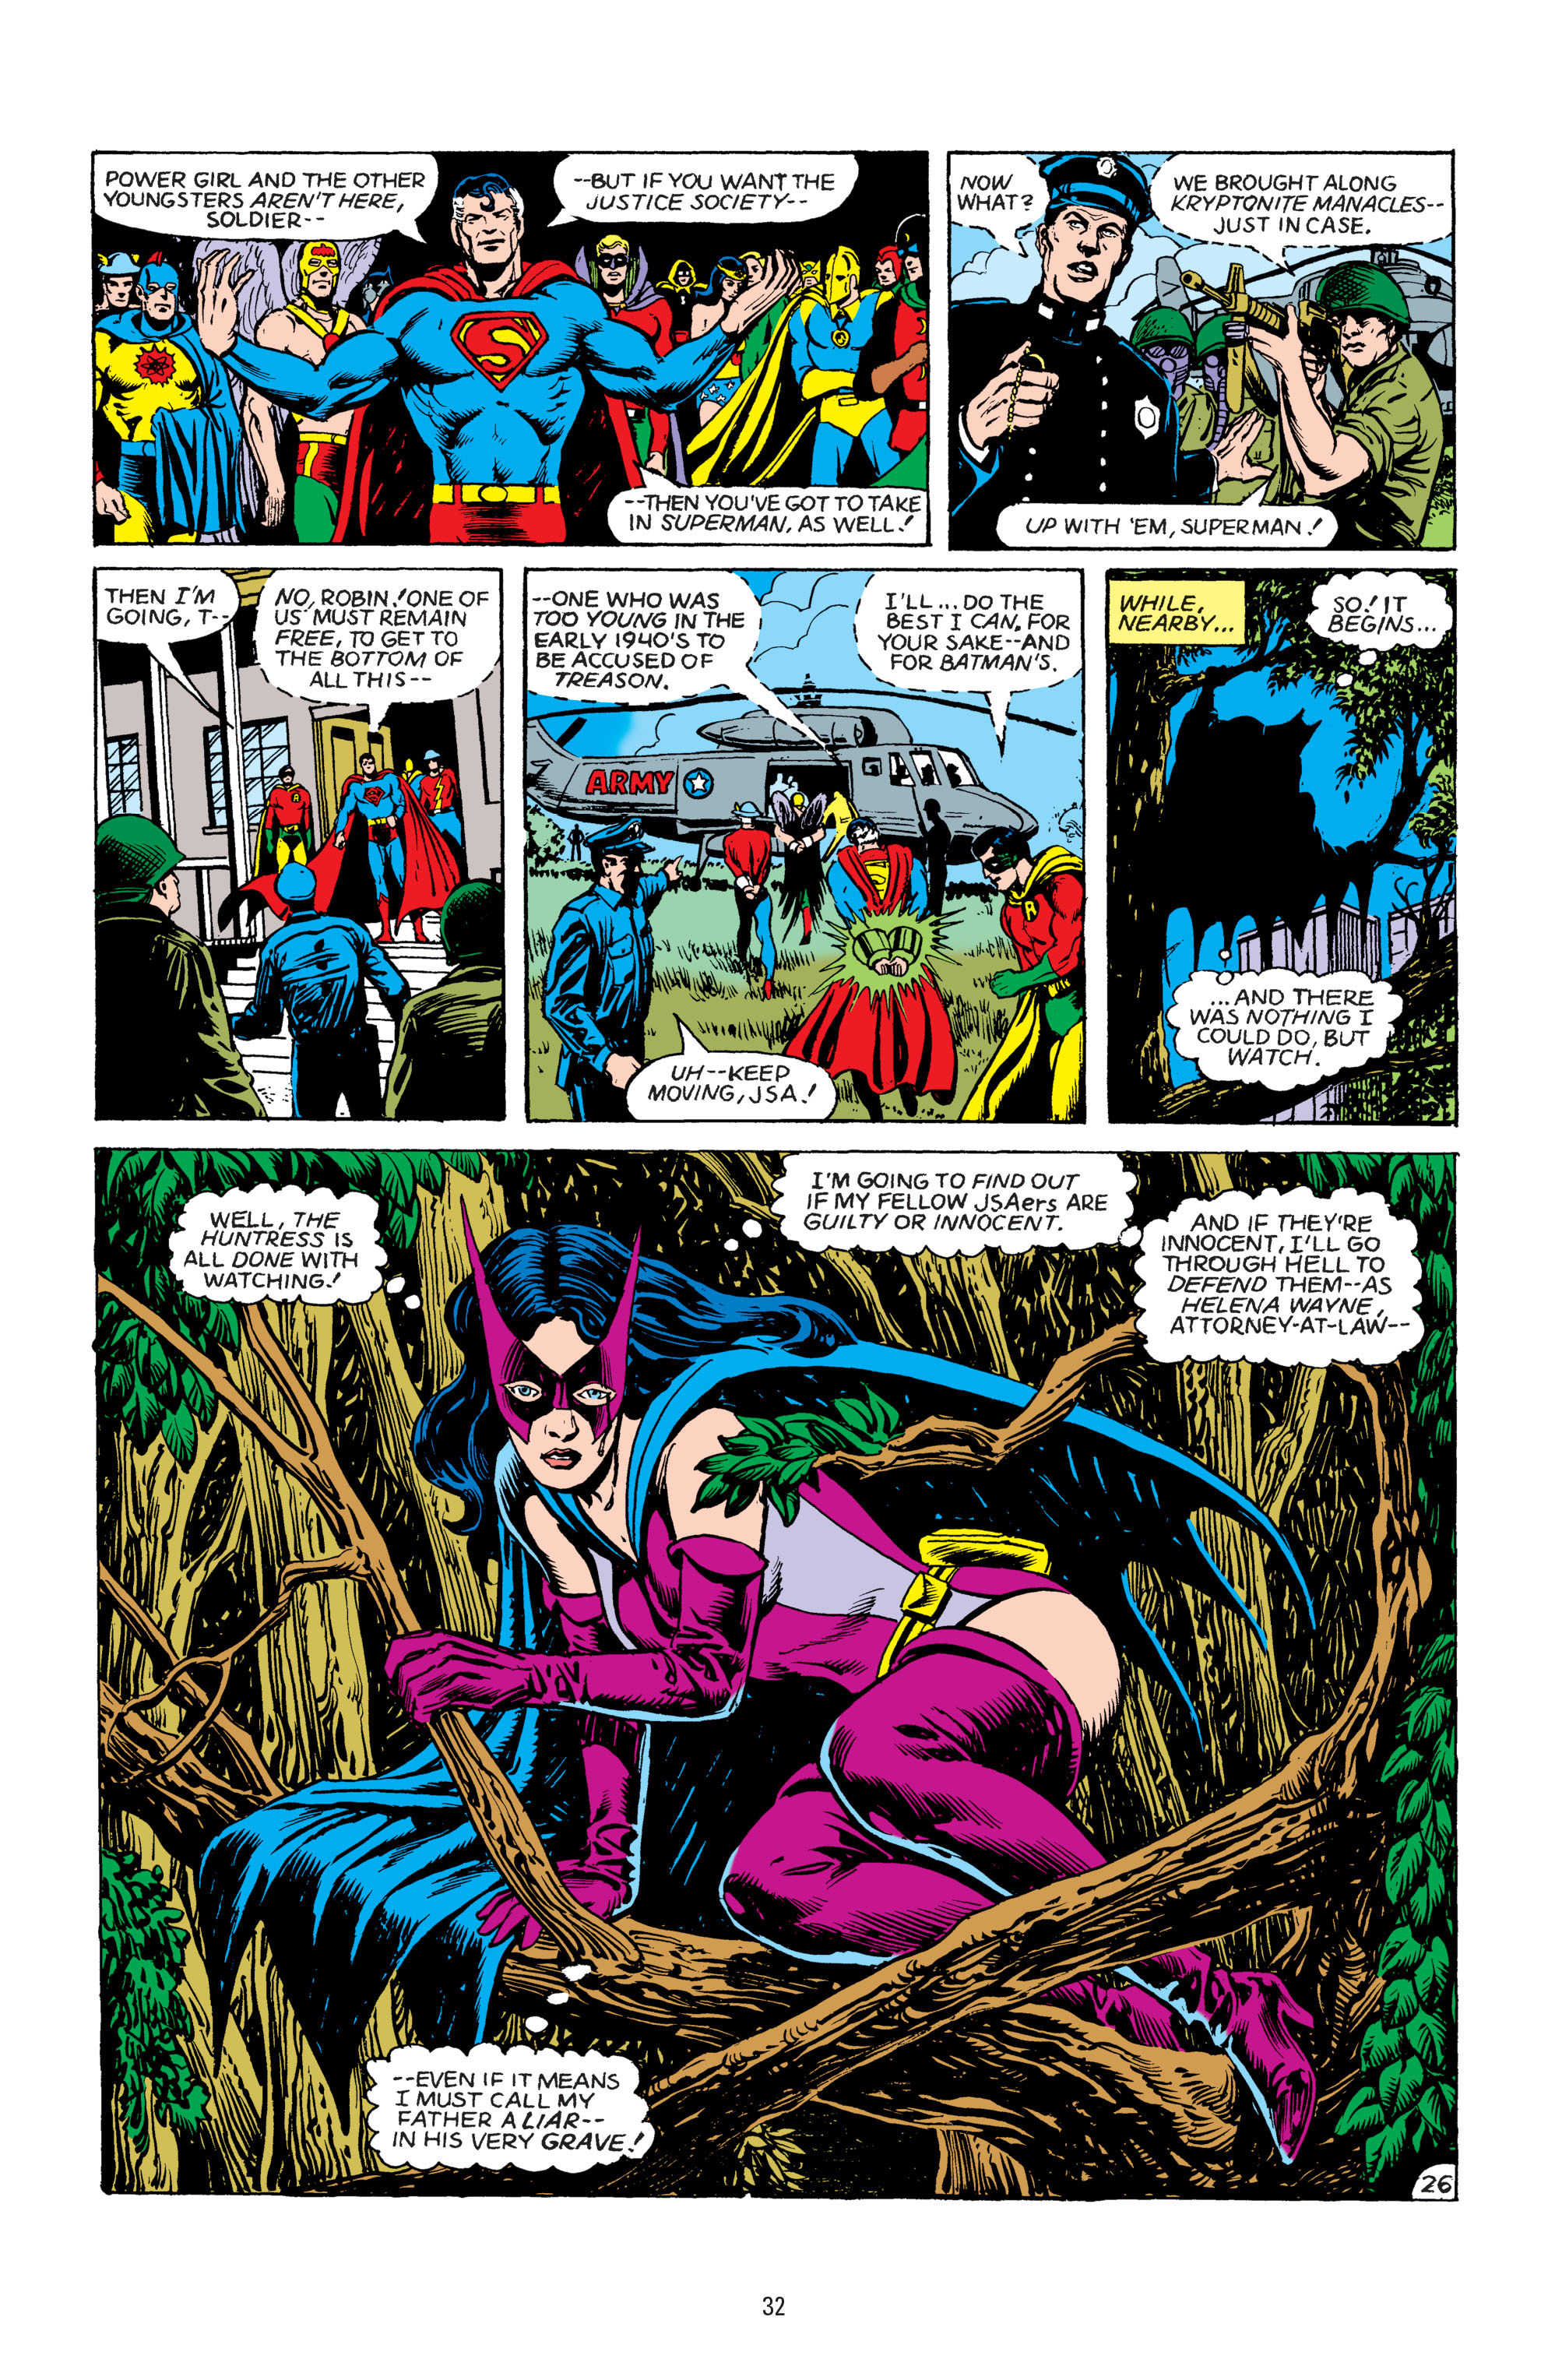 Read online America vs. the Justice Society comic -  Issue # TPB - 31